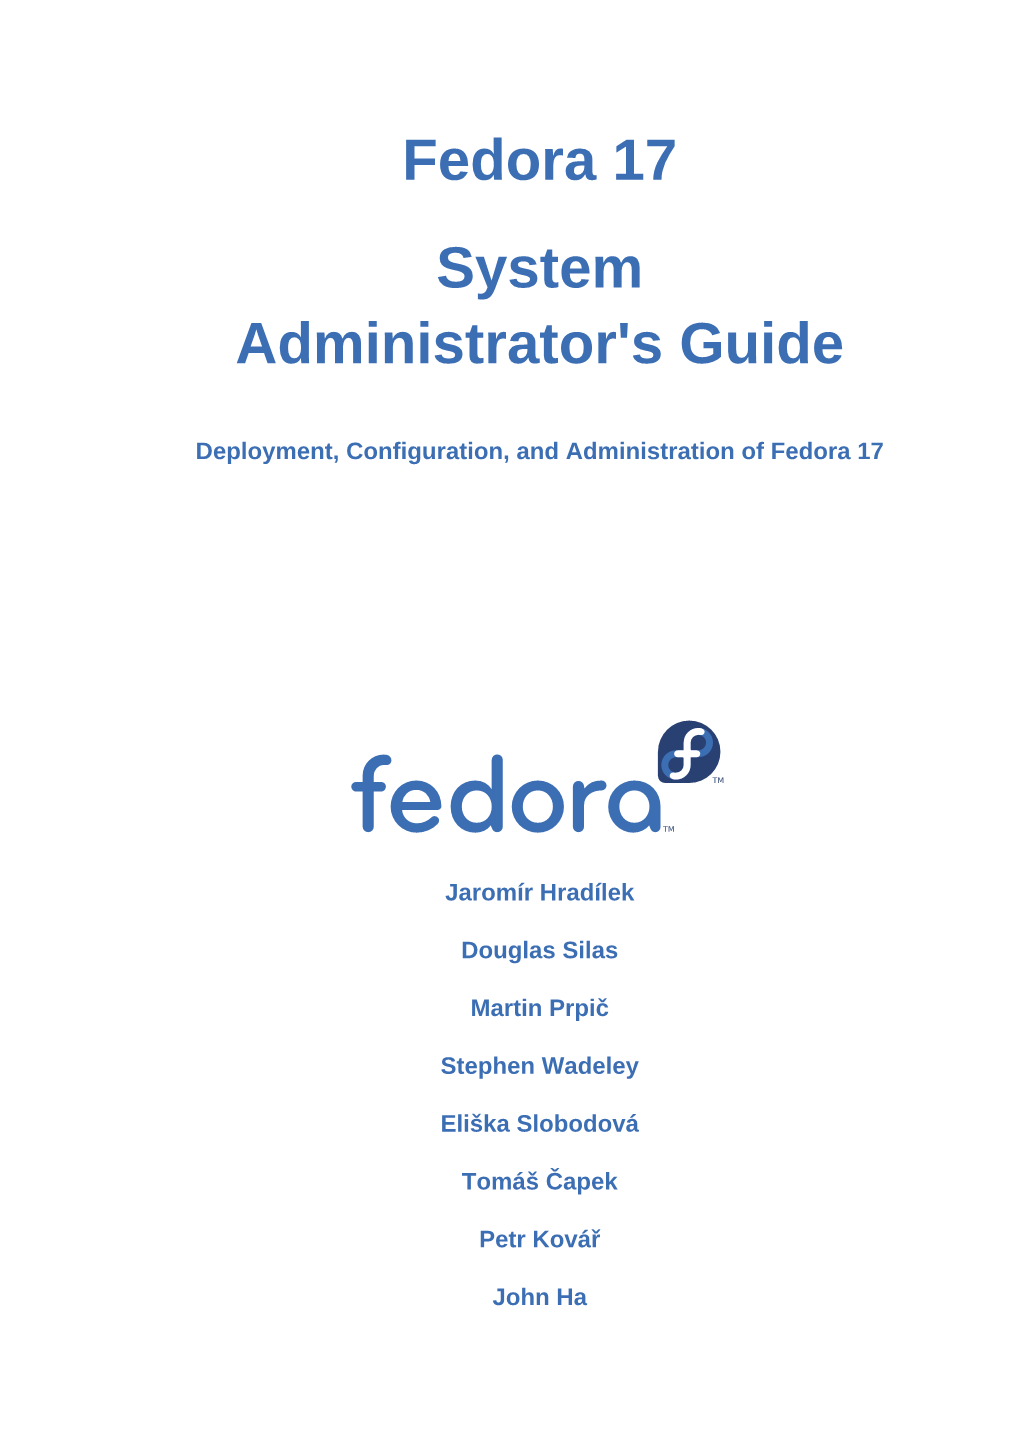 Fedora 17 System Administrator's Guide